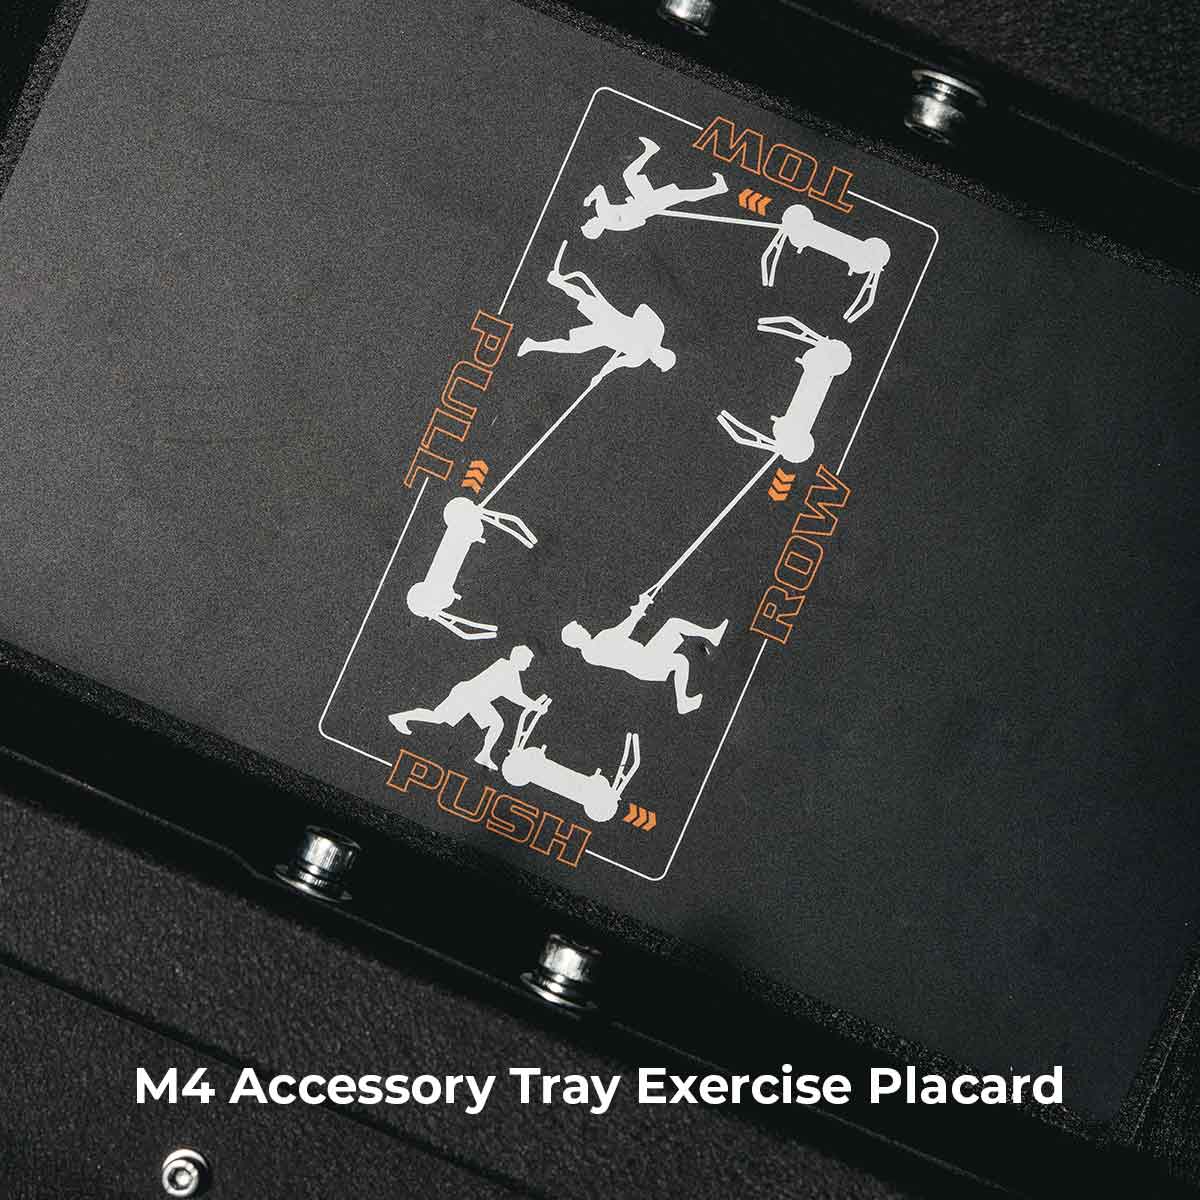 exercise example placard on a torque m4 prowler sled